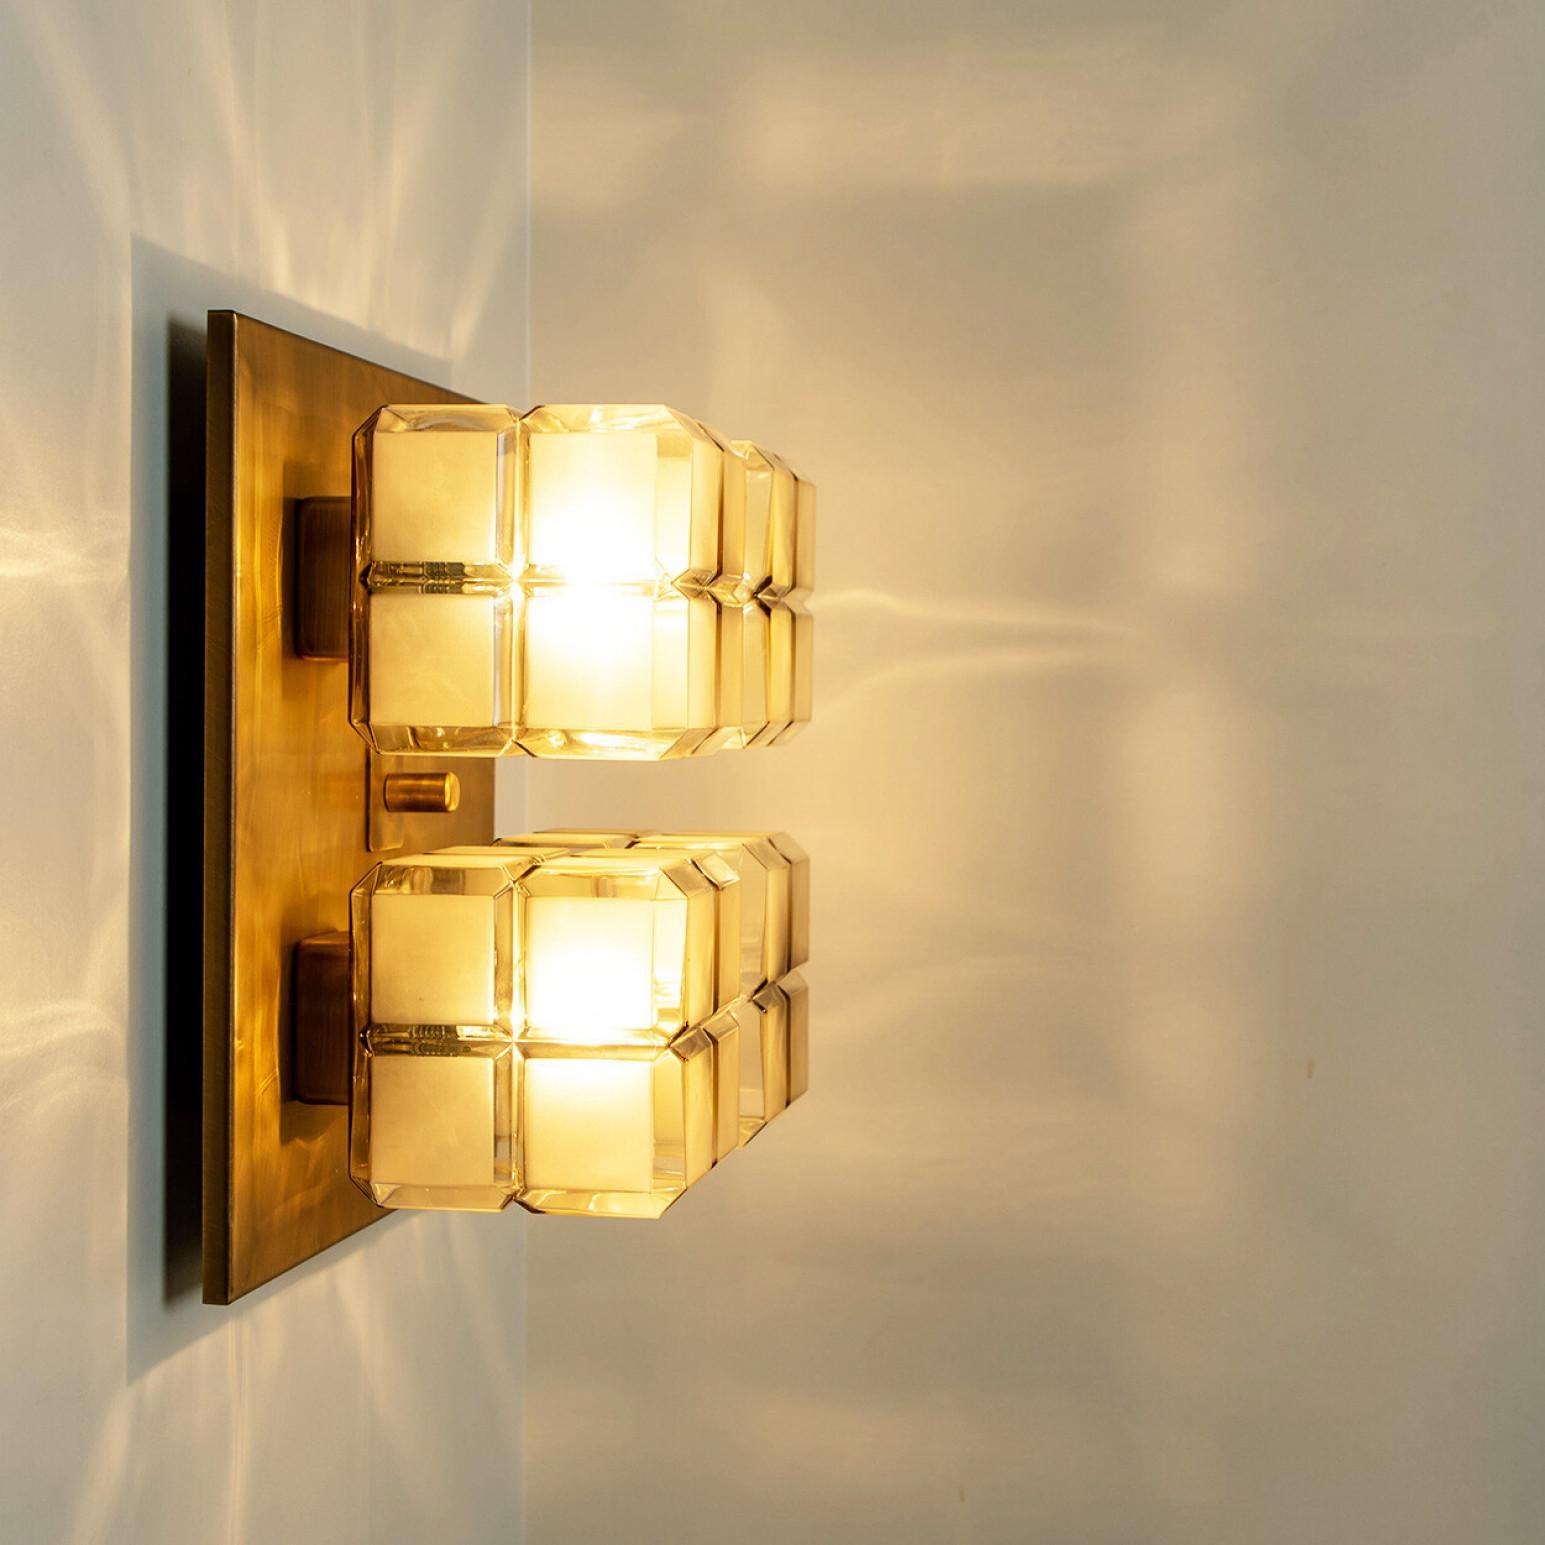 1 of 6 Square Shaped Gold Milkglass Wall Lights Flush Mounts by Glashütte In Good Condition For Sale In Rijssen, NL